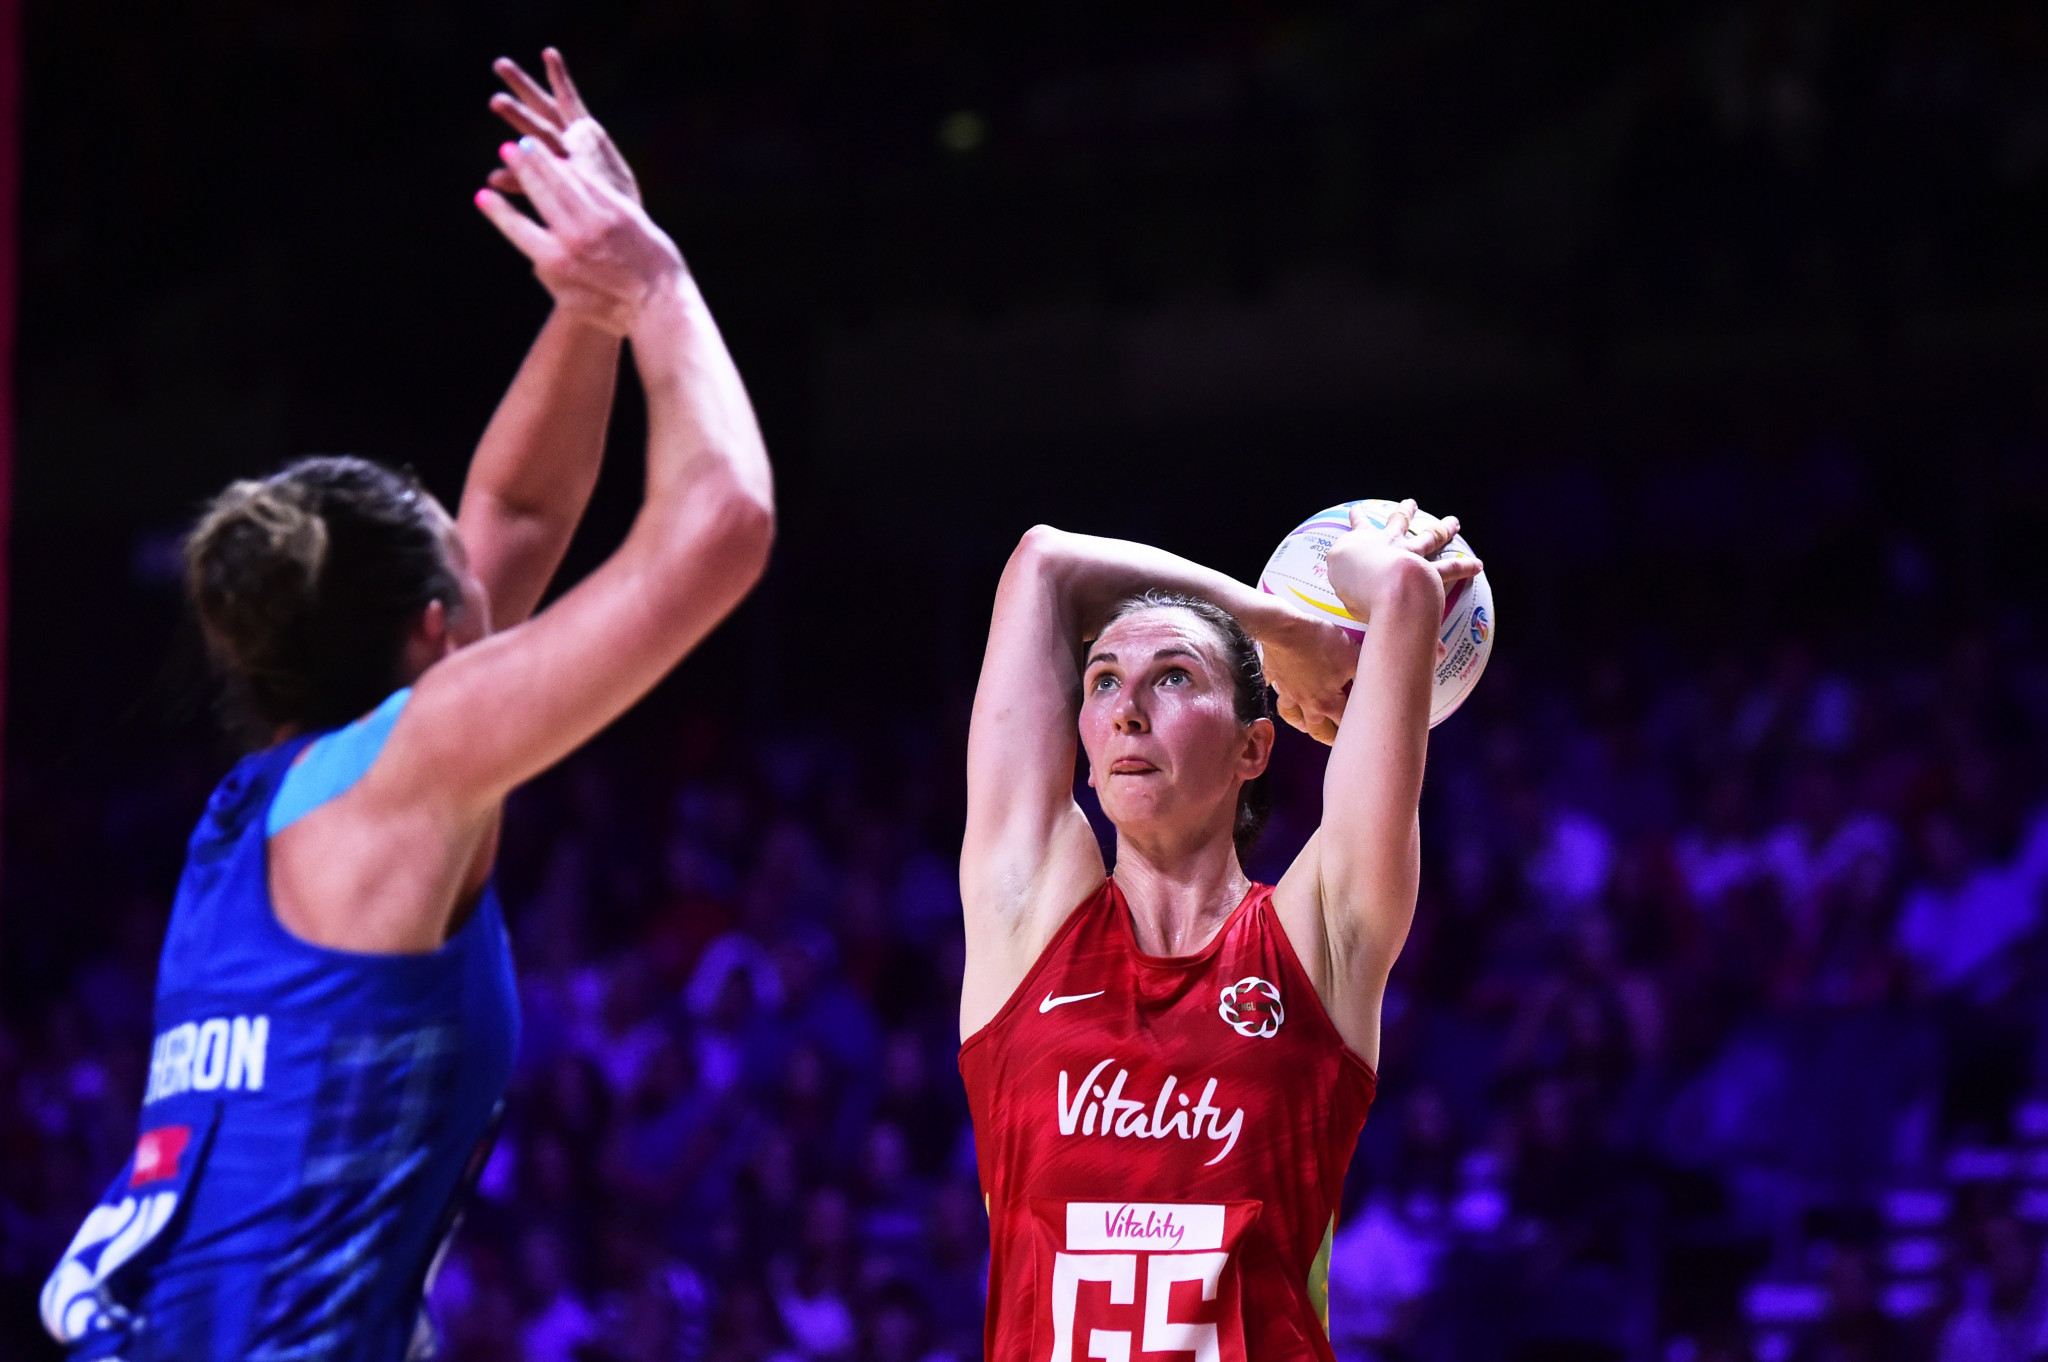 England and Australia continue unbeaten starts at Netball World Cup